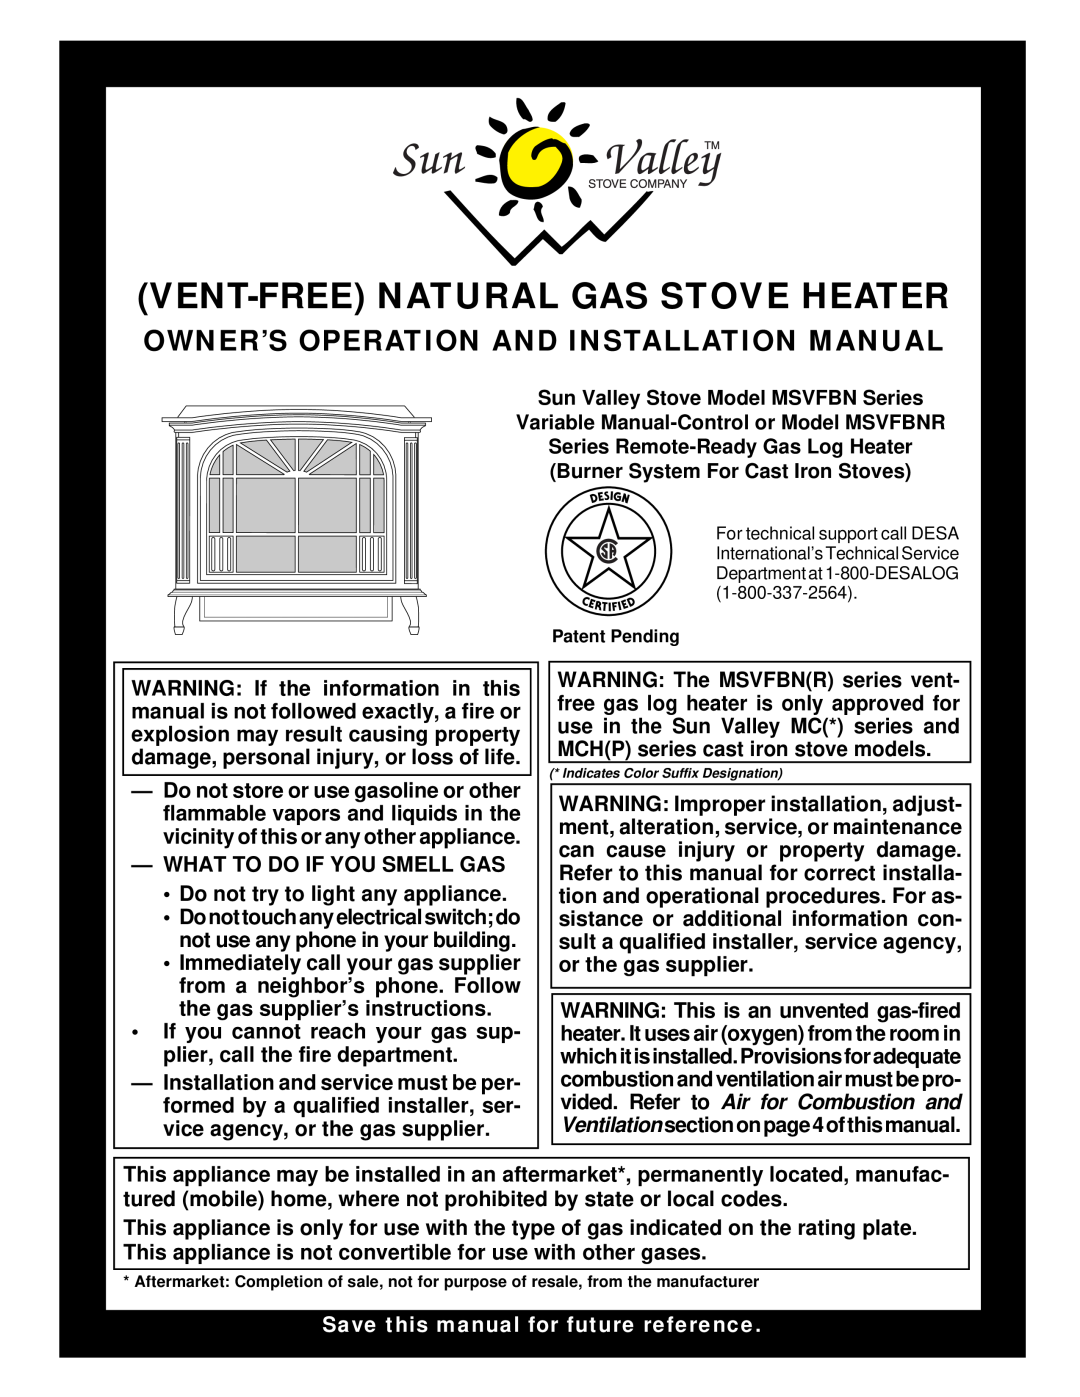 Desa MSVFBNR Series installation manual Vent-Freenatural Gas Stove Heater, Owner’S Operation And Installation Manual 